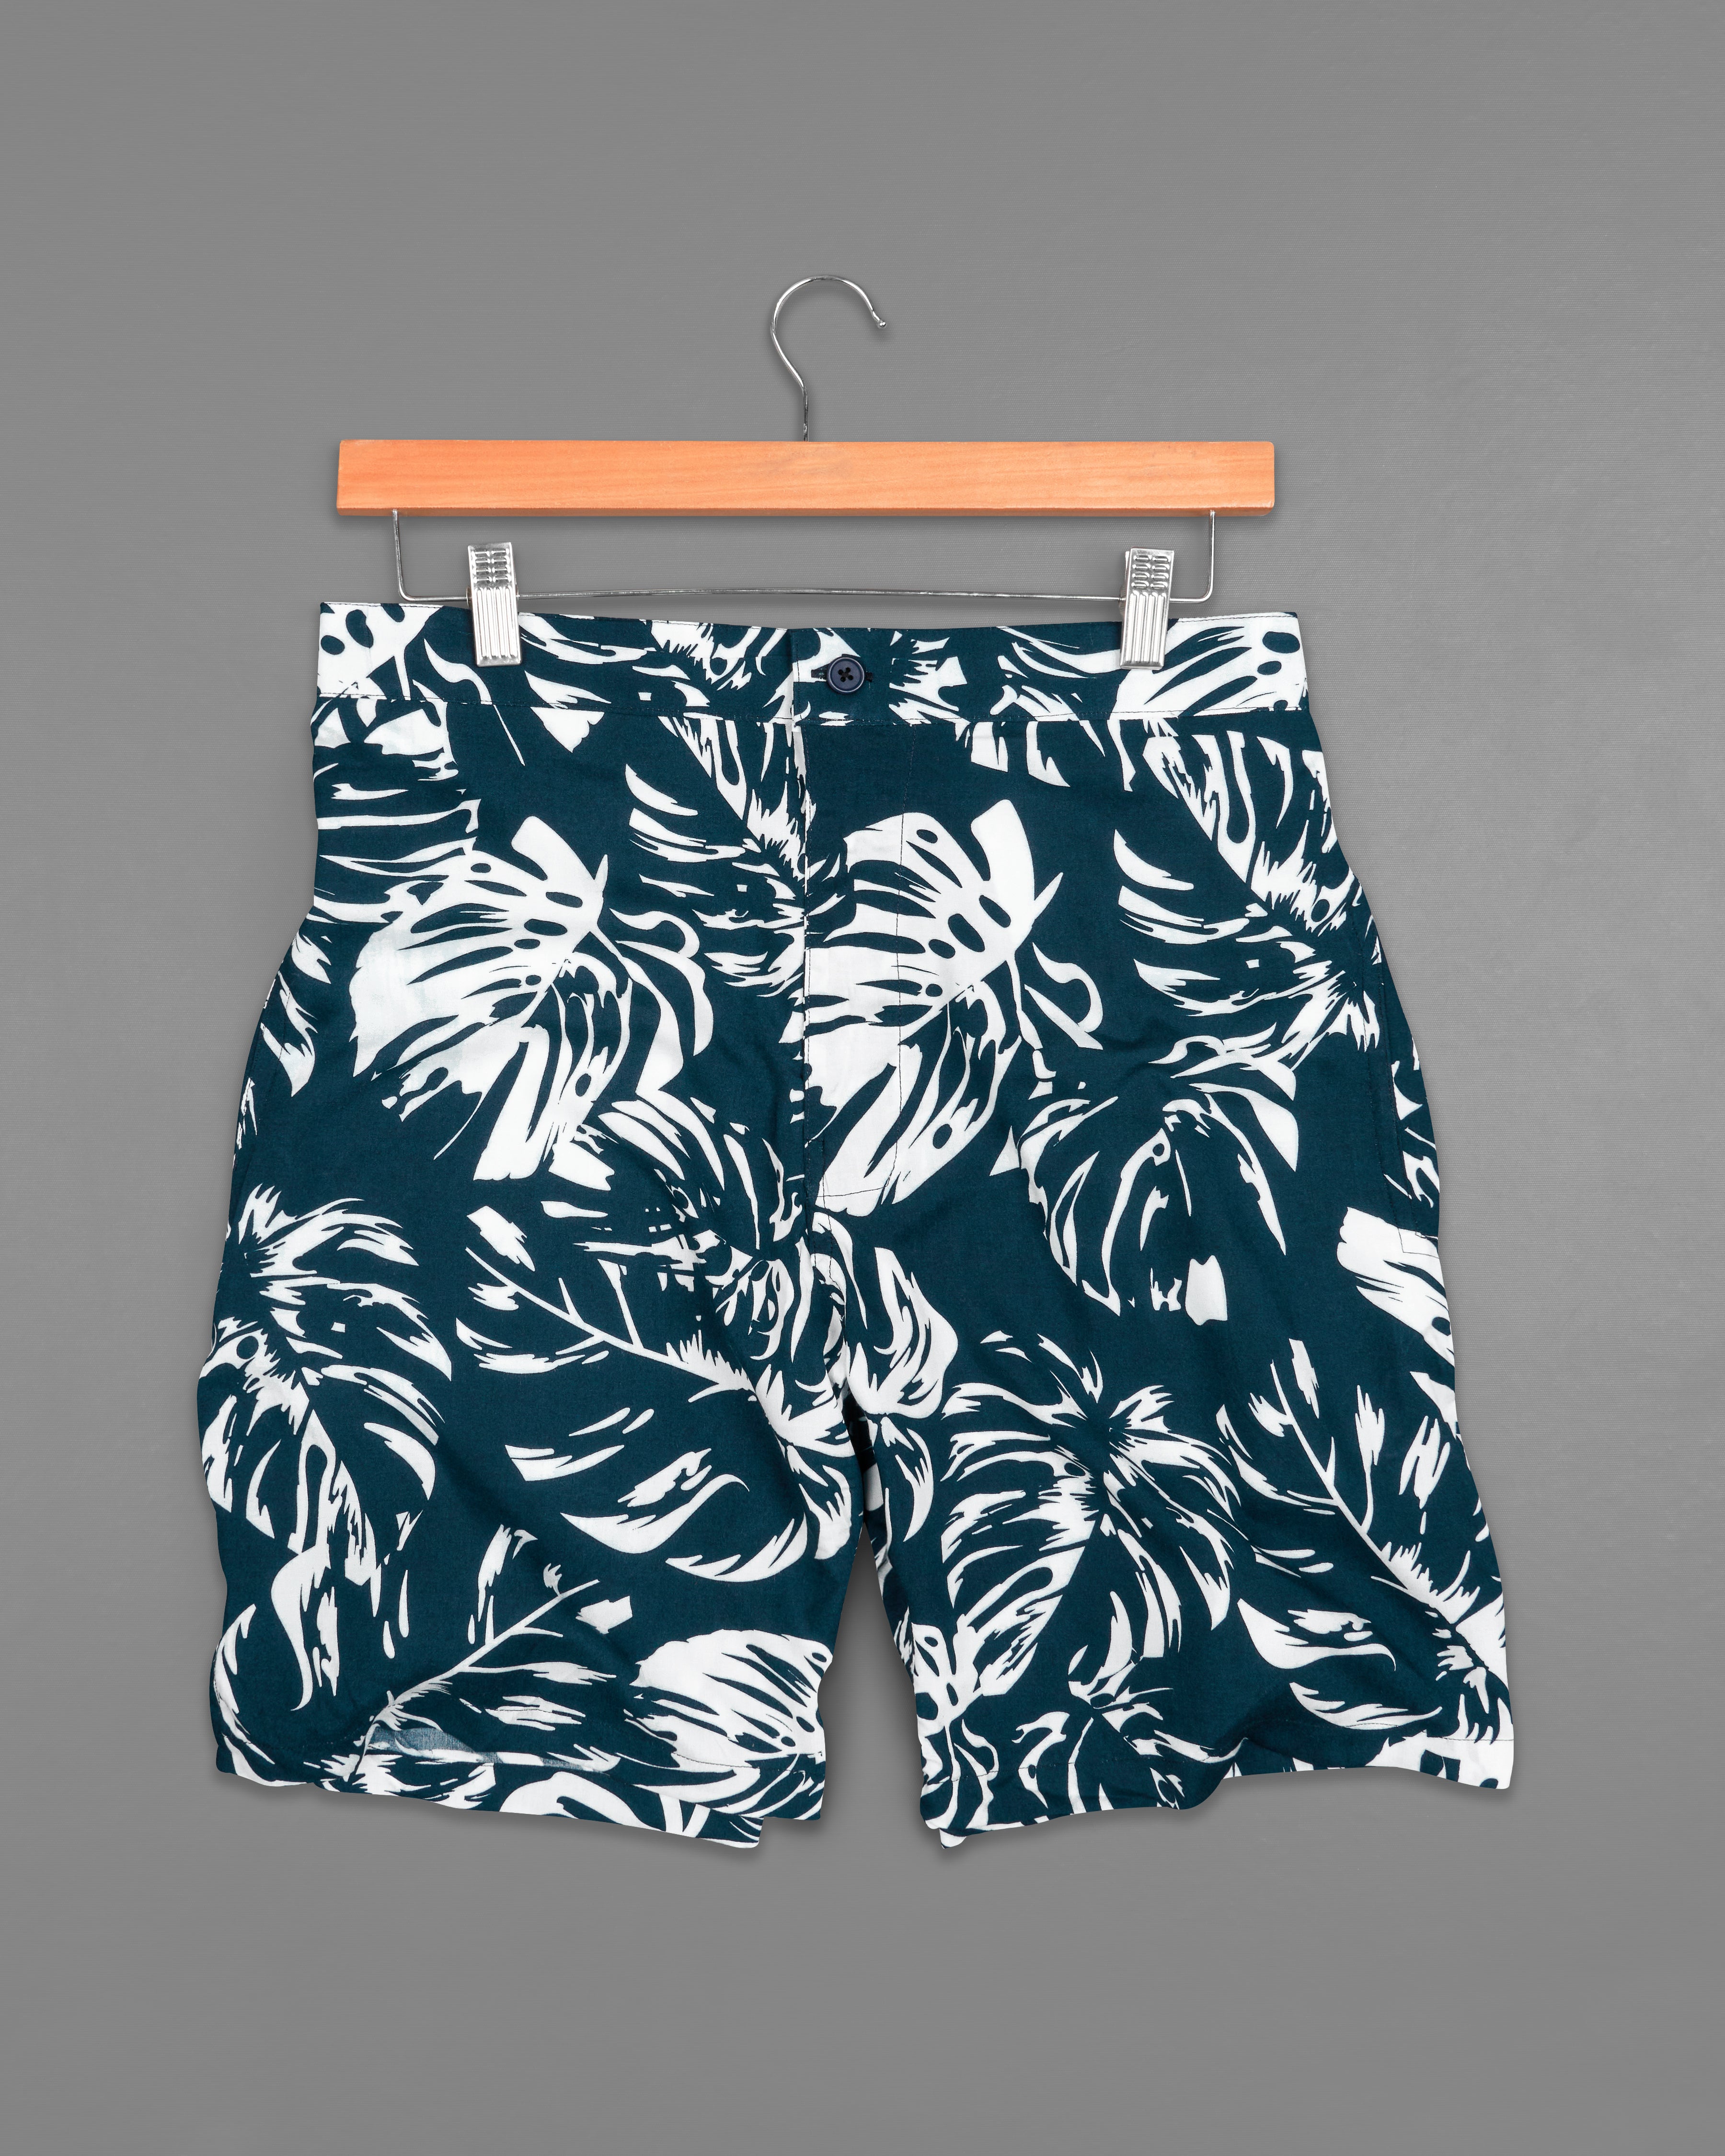 Shade Blue with White Leaves Printed Premium Tencel Shorts SR241-28, SR241-30, SR241-32, SR241-34, SR241-36, SR241-38, SR241-40, SR241-42, SR241-44